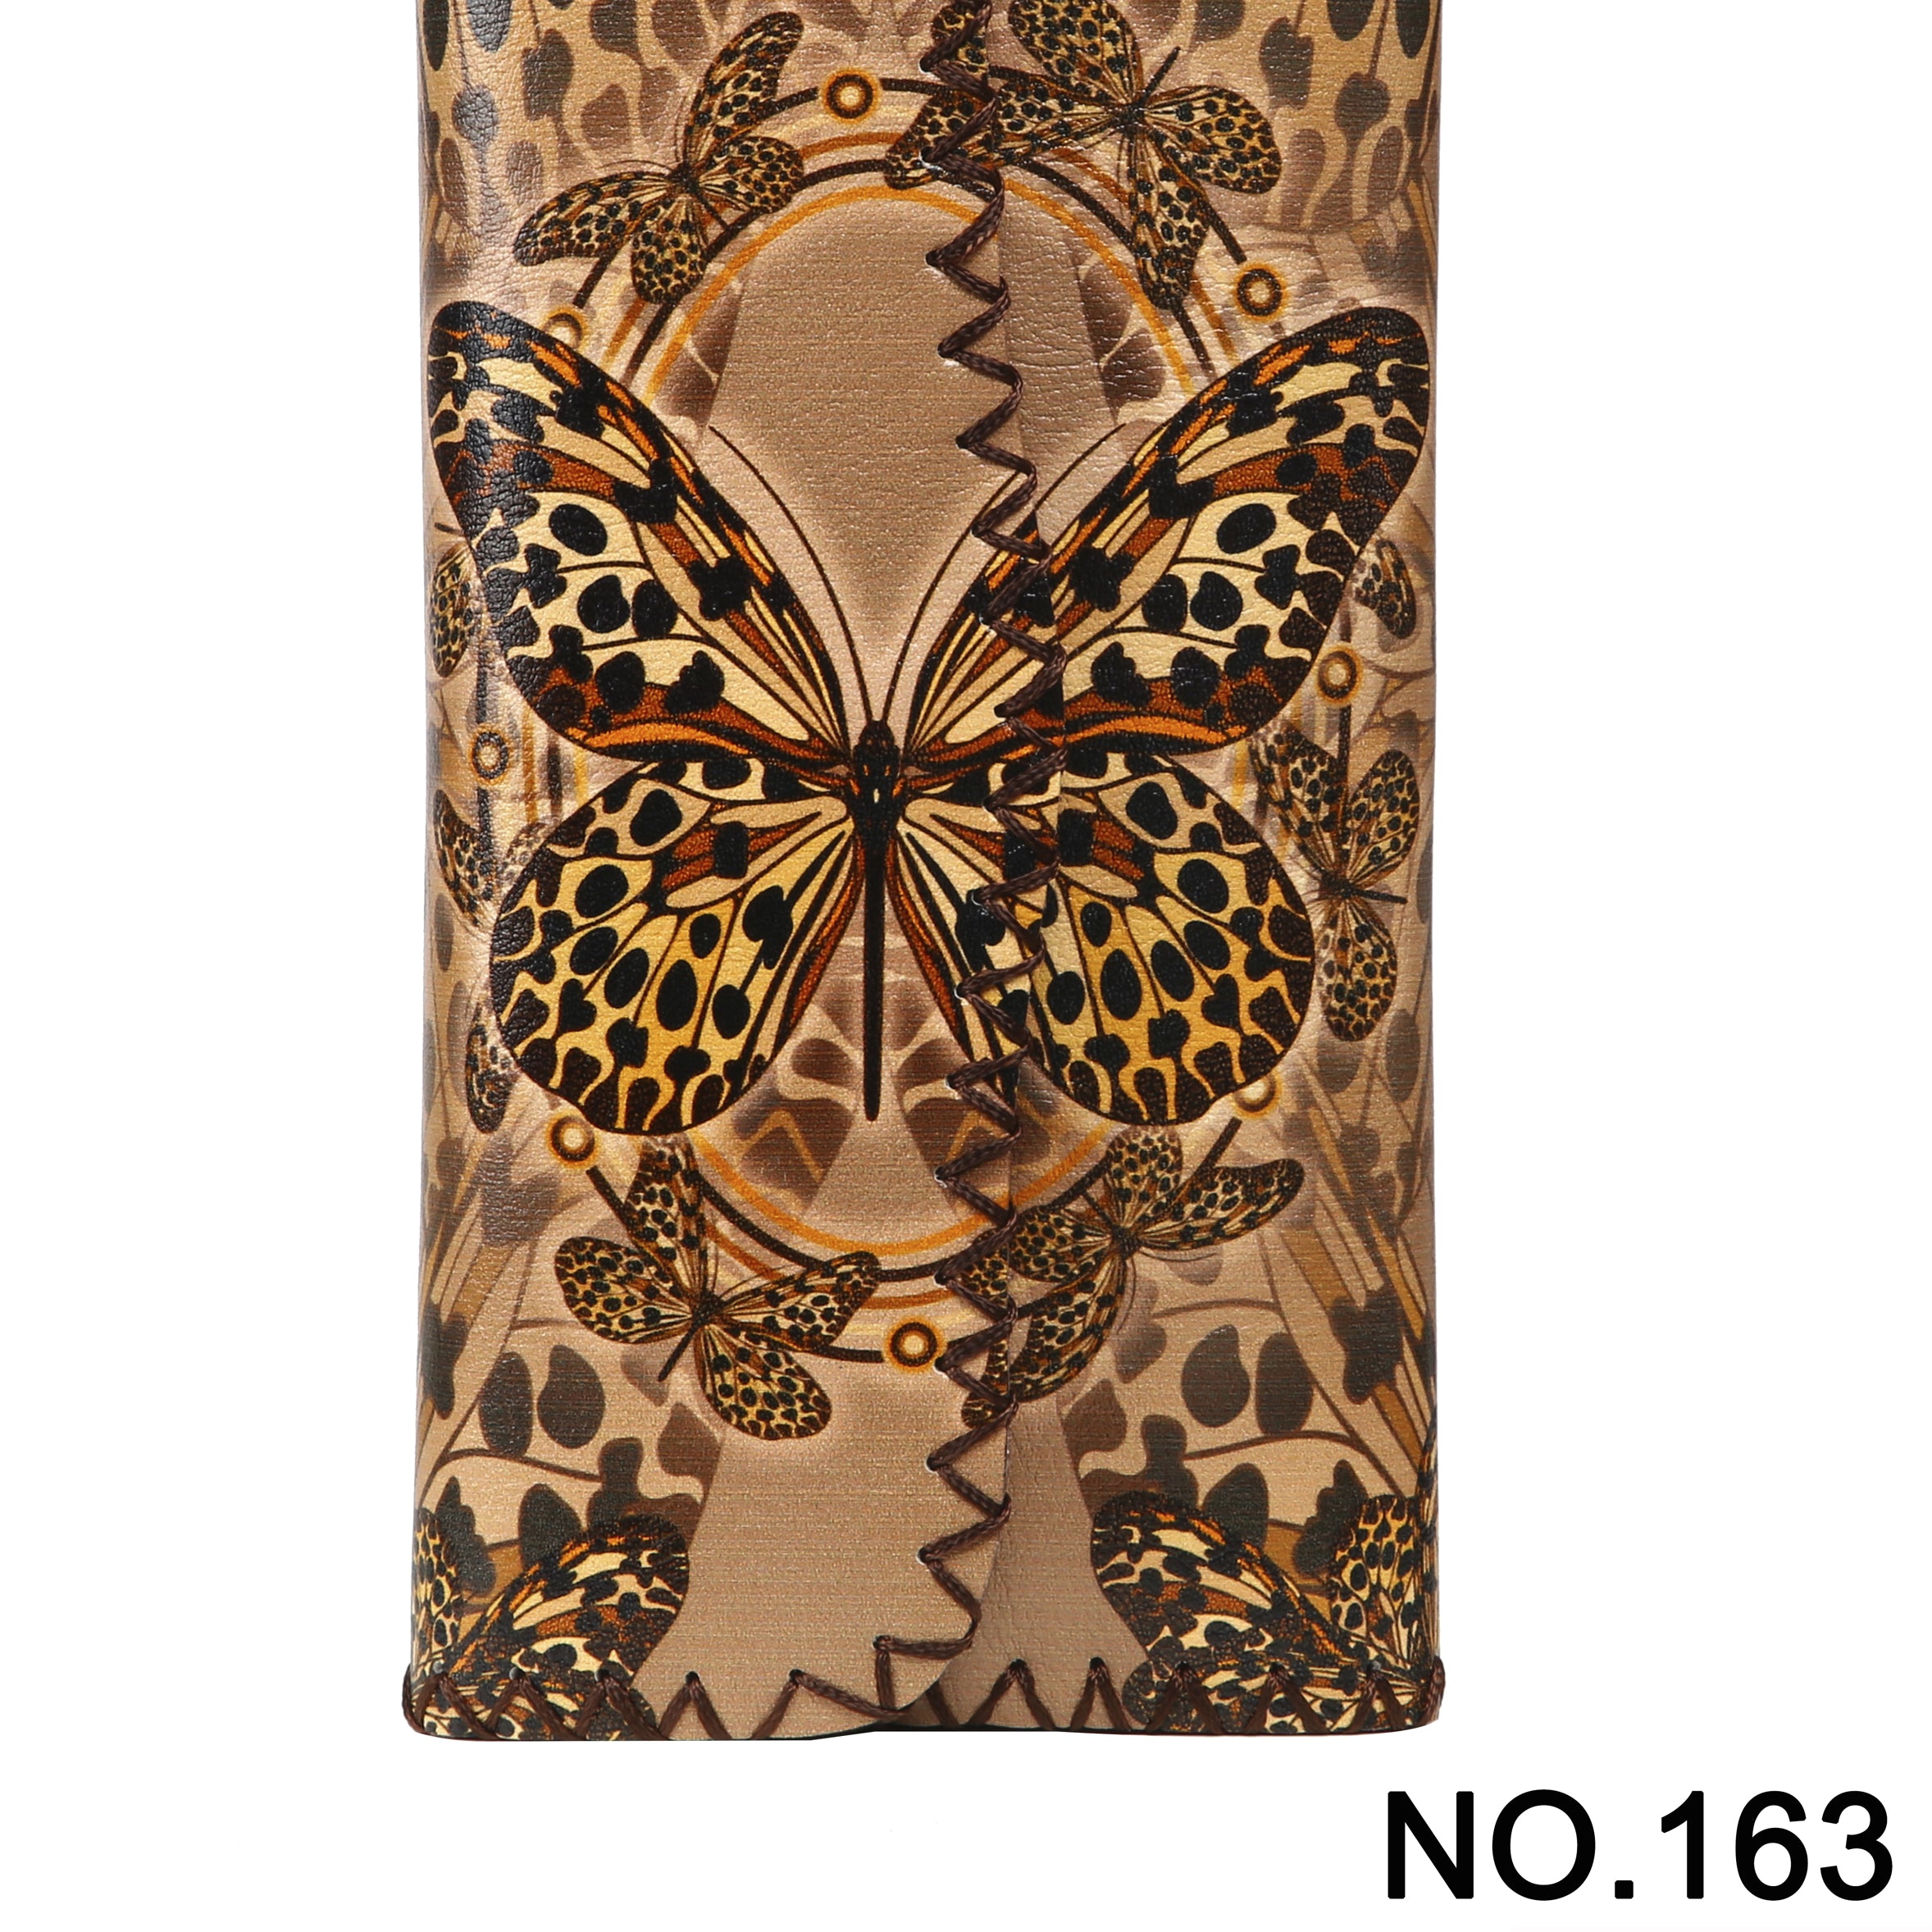 Butterfly Animal Printed Wallet HB0582 - NO.163